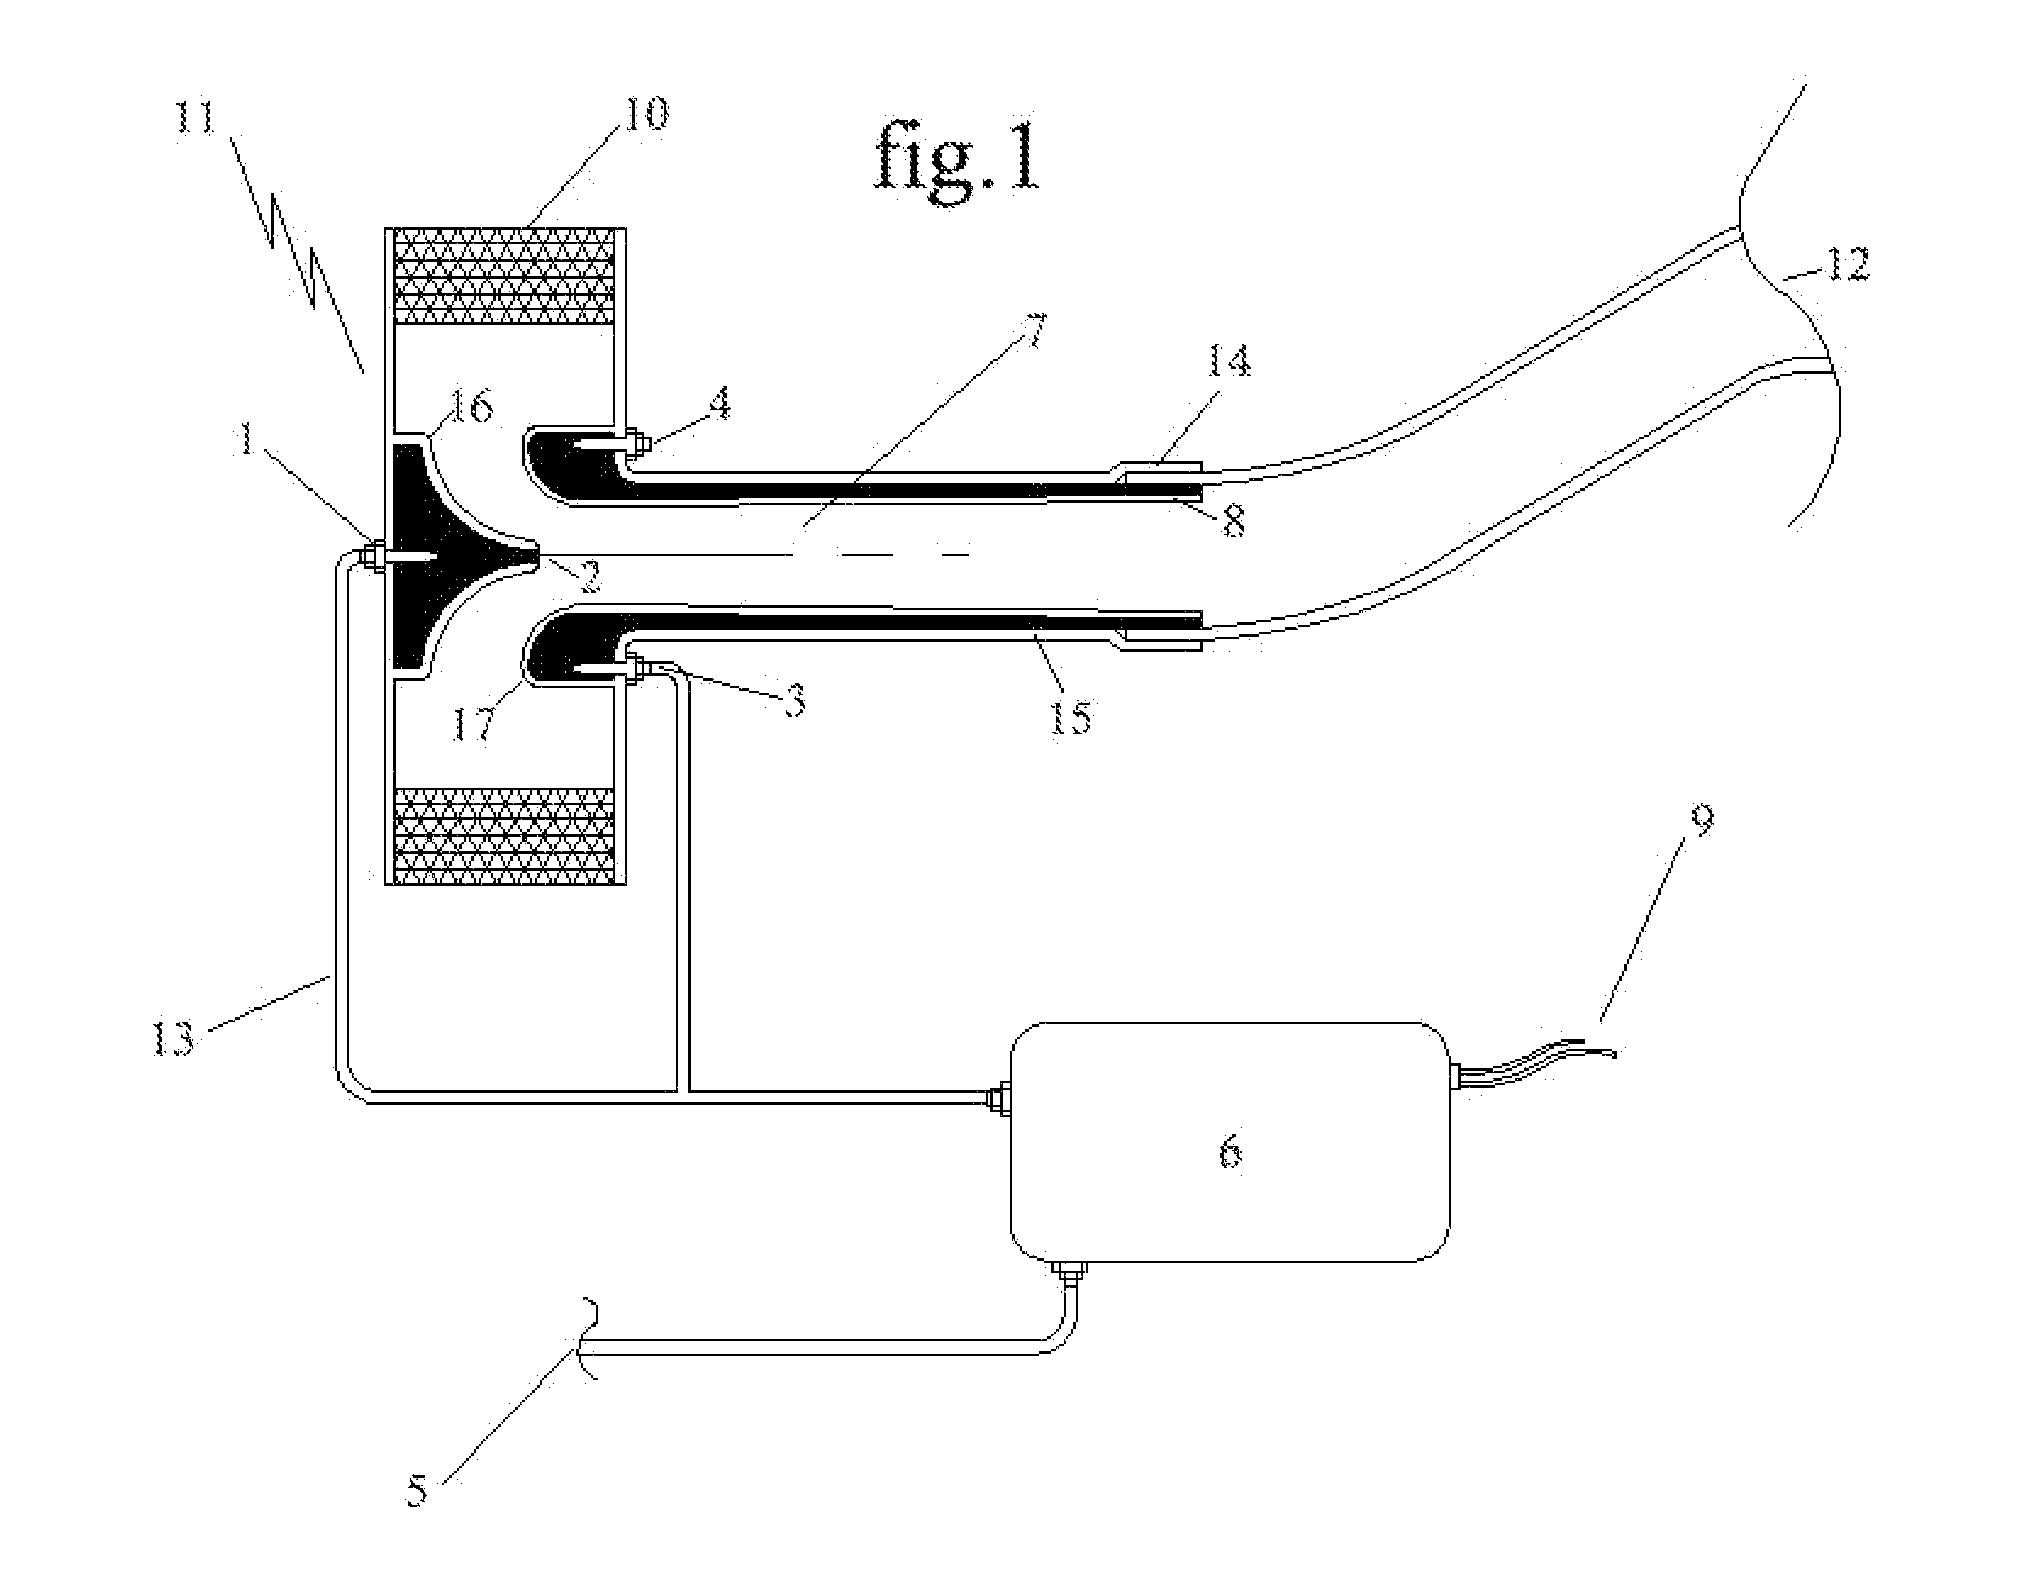 Apparatus for the multiplication of air flow in internal combustion engines increasing horsepower and torque, while reducing emissions